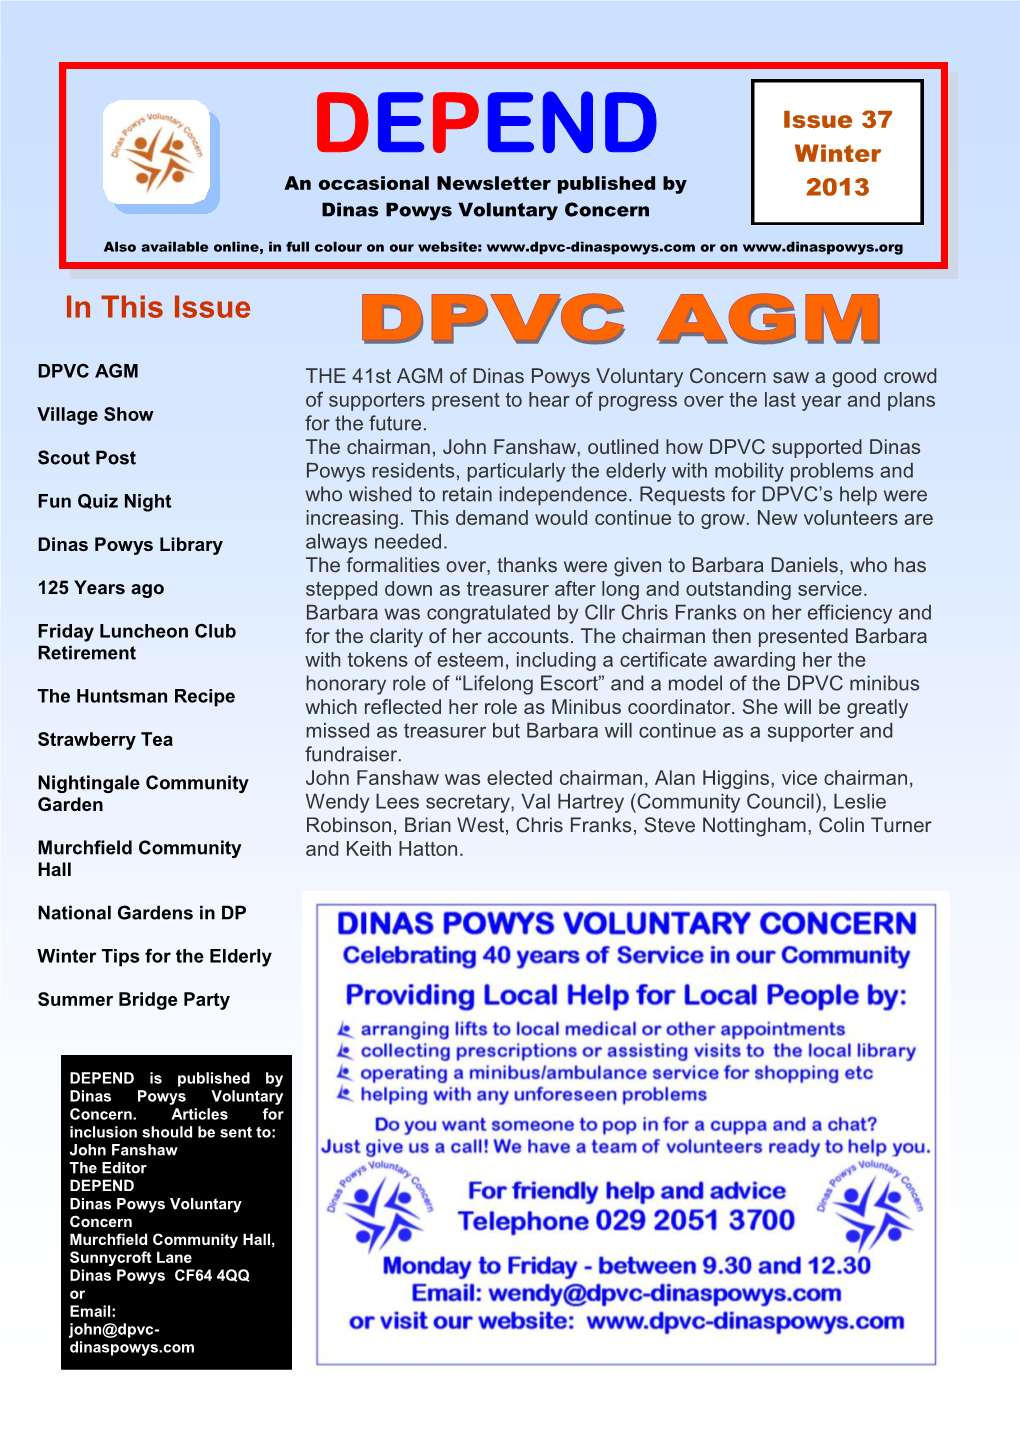 DEPEND Winter an Occasional Newsletter Published by 2013 Dinas Powys Voluntary Concern